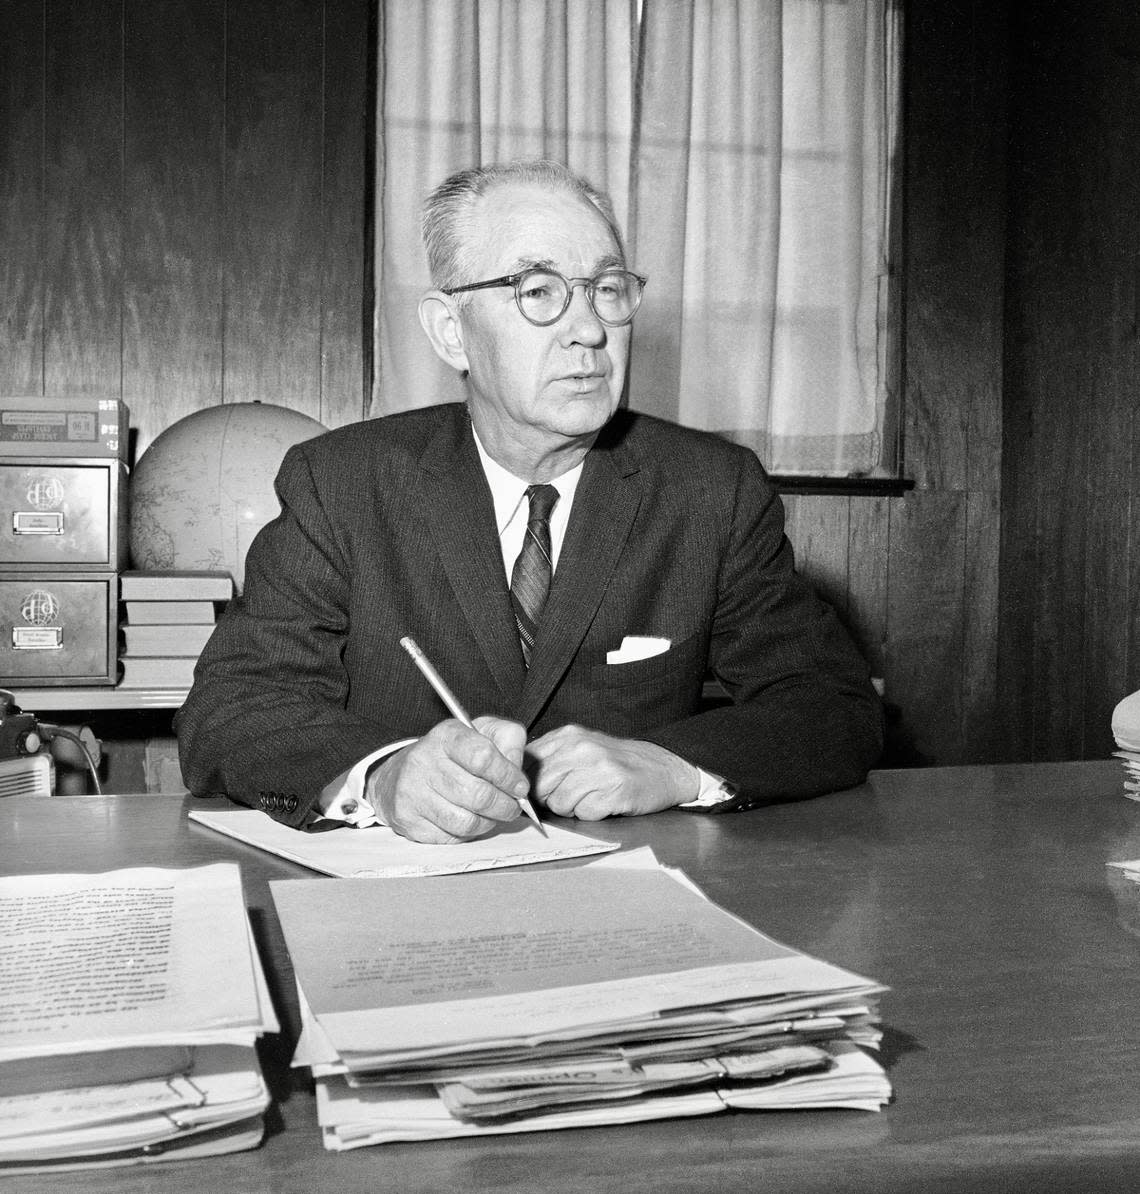 Robert Welch, founder and head of the John Birch Society, an anti-government group that campaigns against communism, is pictured in his Belmont, Mass., office, April 1, 1961. (AP Photo)